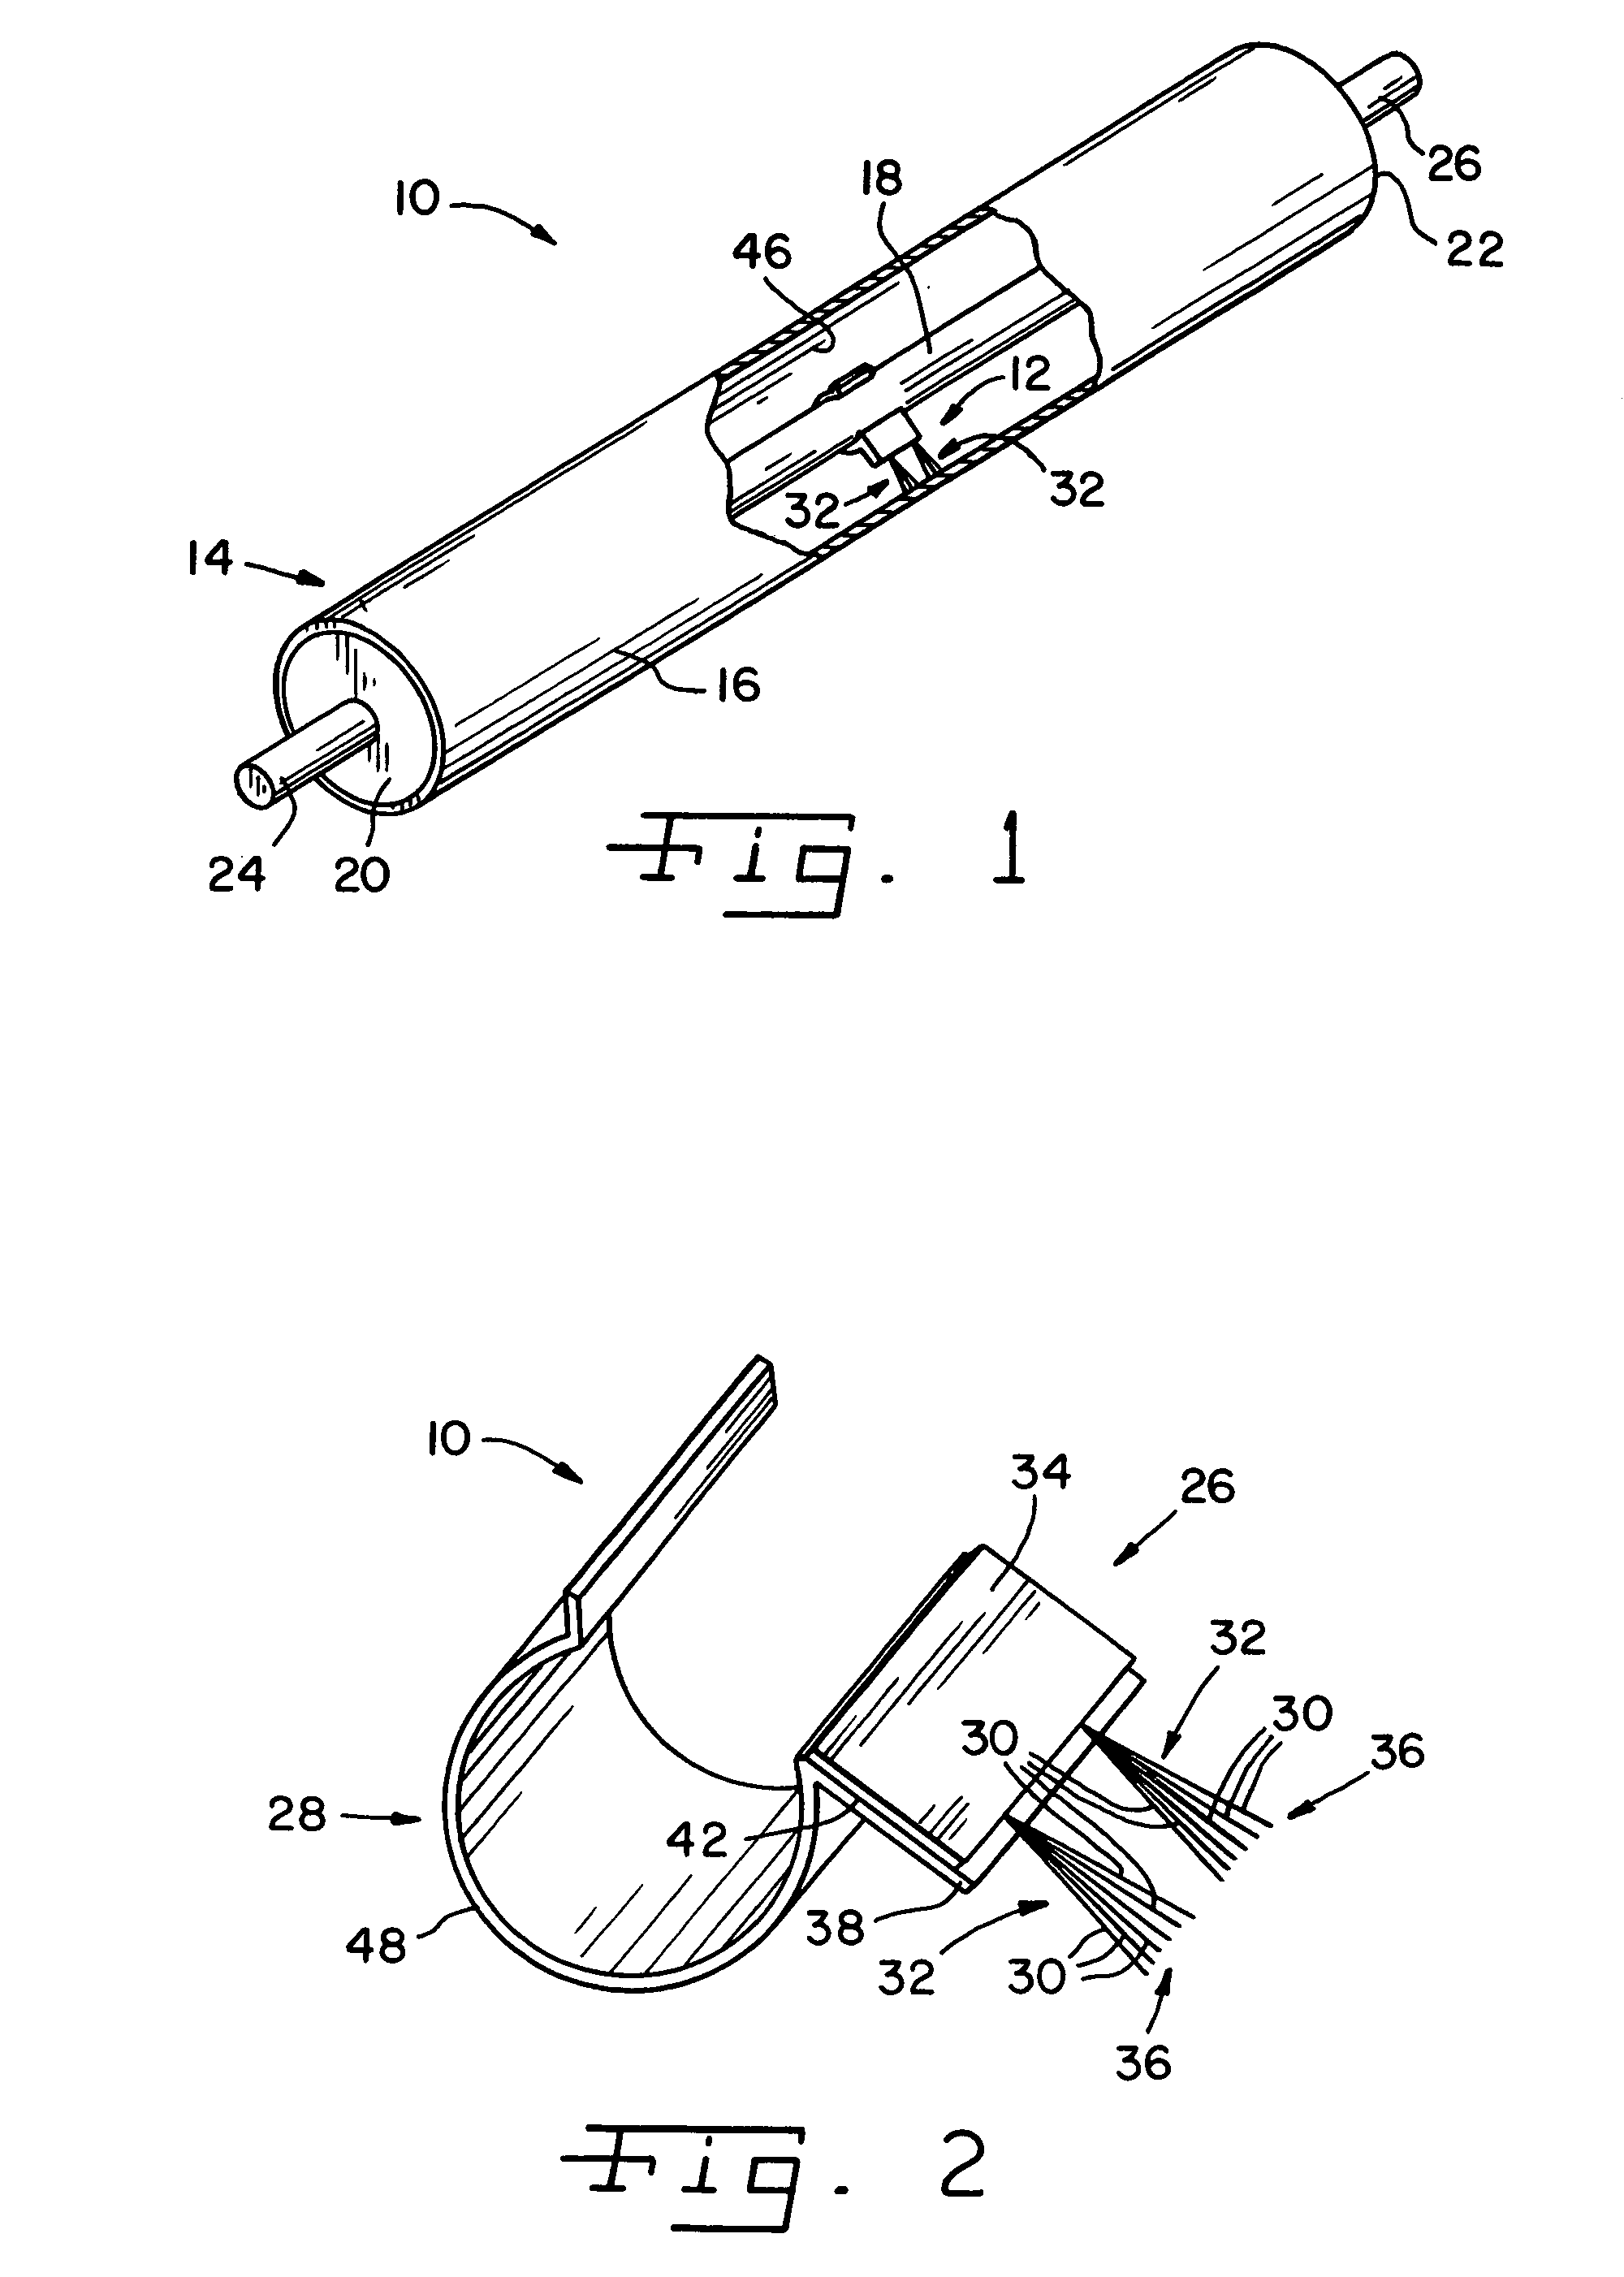 Static charge neutralizing assembly for use on rollers and shafts